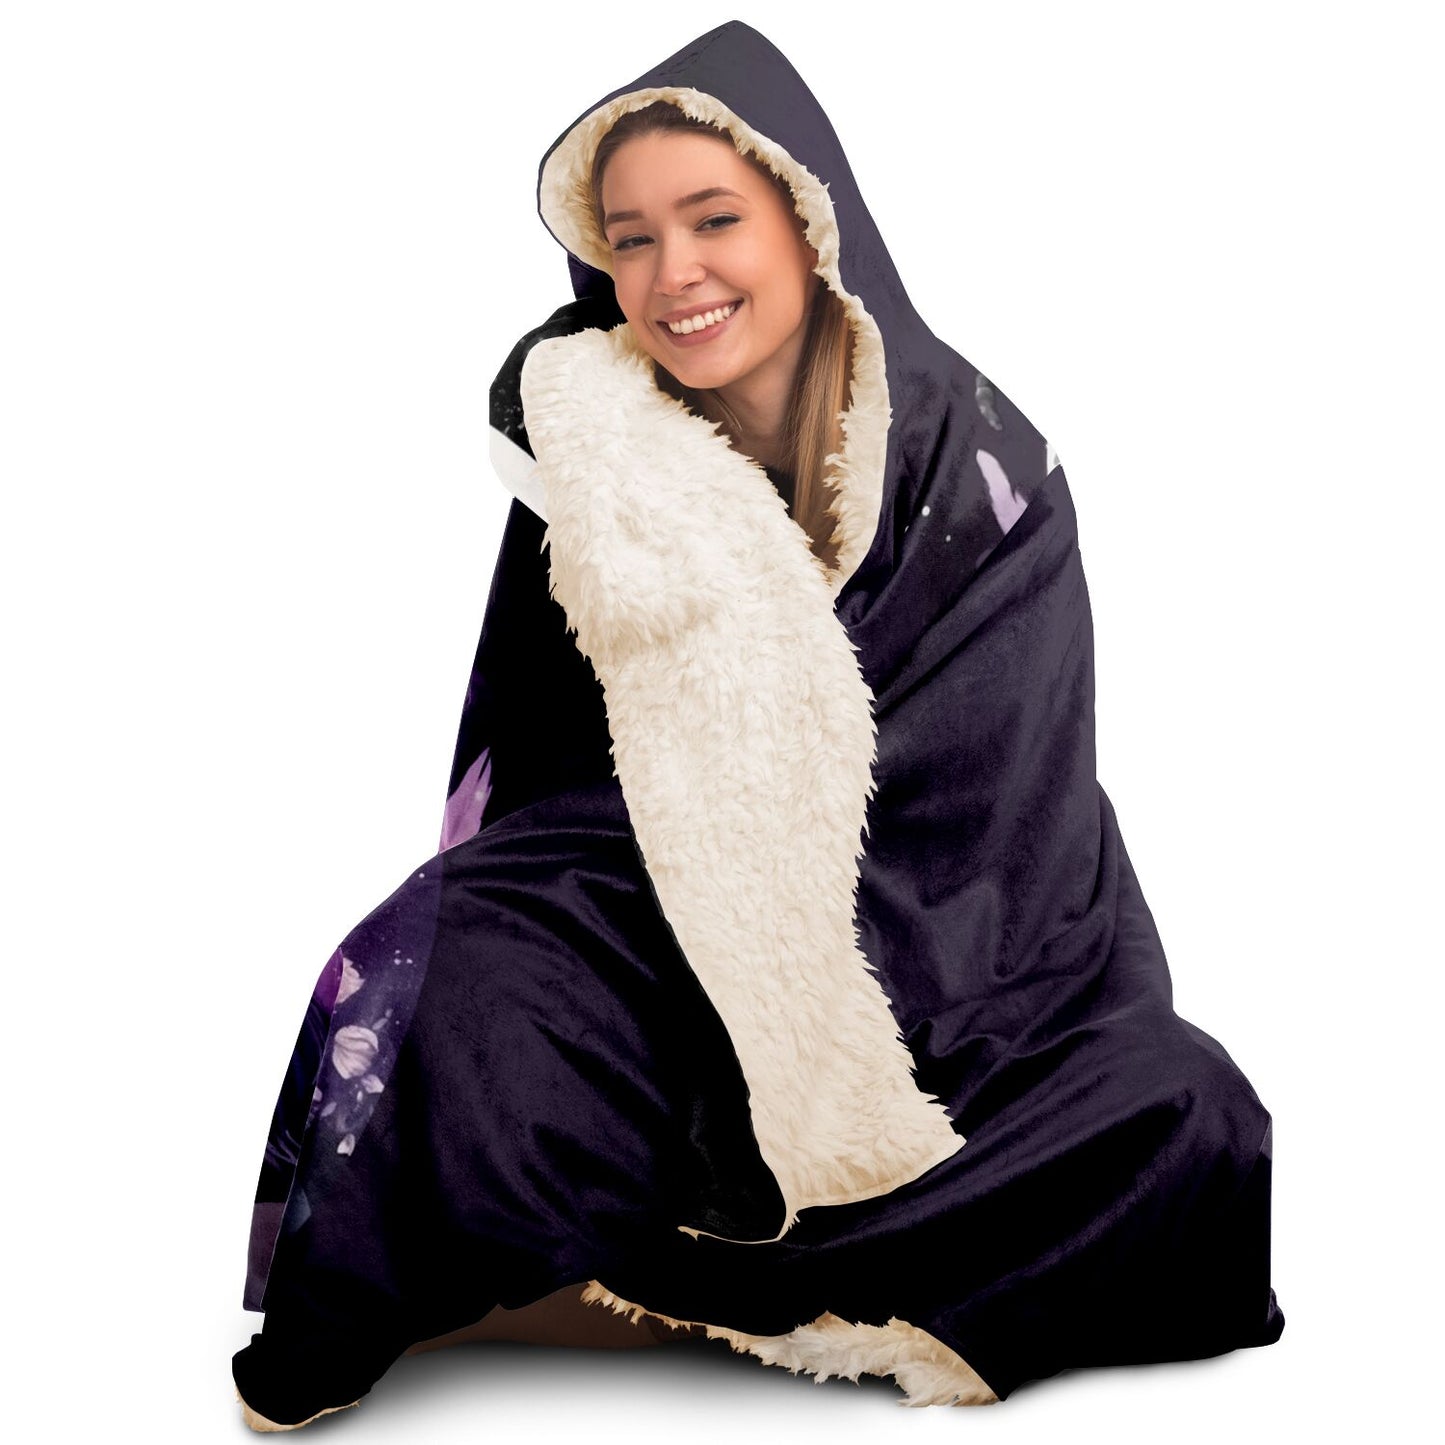 Capricorn Sign In Purple with Leaves Hooded Blanket